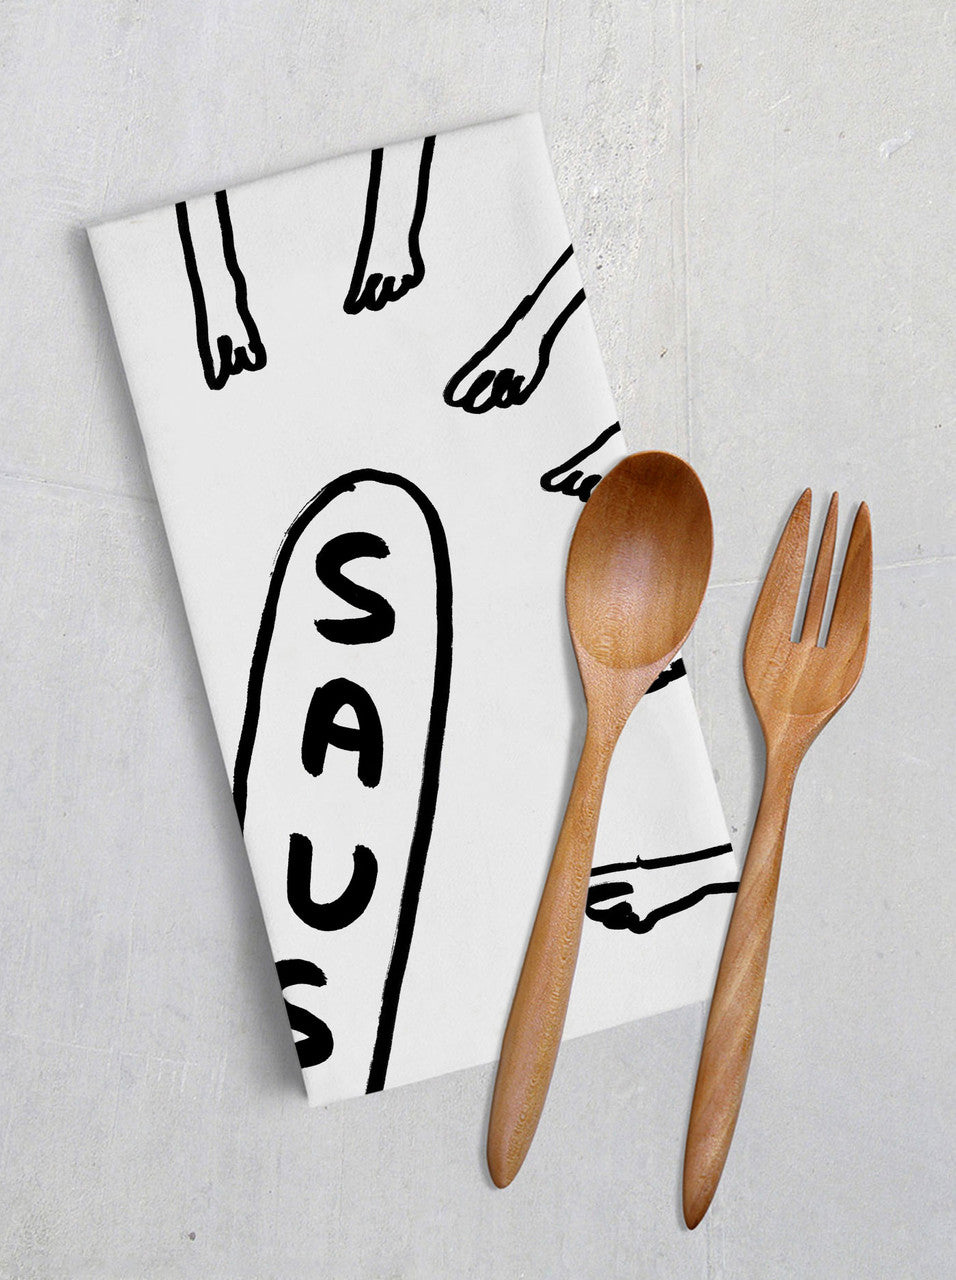 A white tea towel with a black outlined illustration of many hands pointing to a sausage. The sausage is the outline shape with the word SAUSAGE in block capitals. This is a lifestyle image with the tea towel folded alongside wooden kitchen implements.